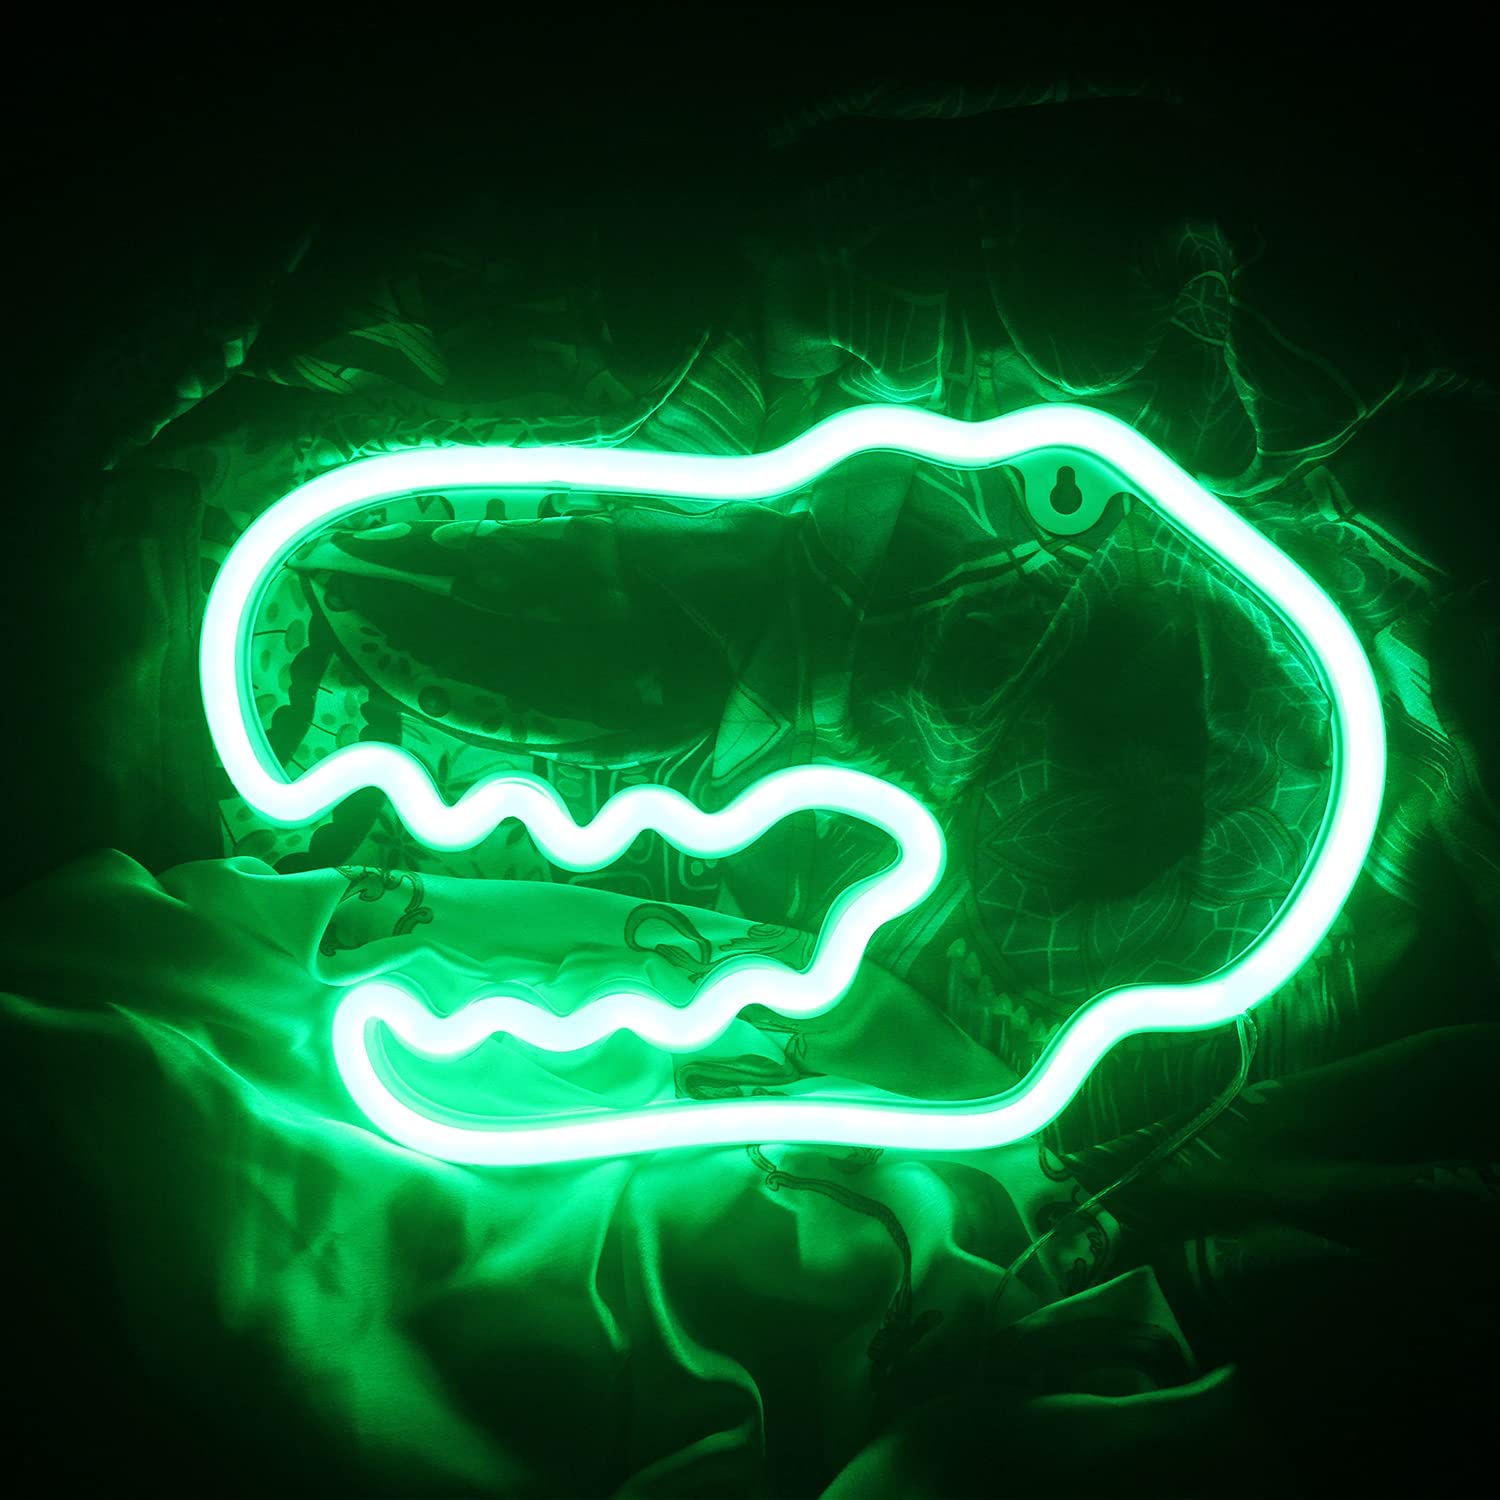 Buy Dinosaur Head Neon Signs Led Neon Light Green Indoor Decorative Glowing Night Light USB or Battery Operated for Home Party Festival Decoration Gift for Kids (Green) Online in Indonesia. B091KD6NPL